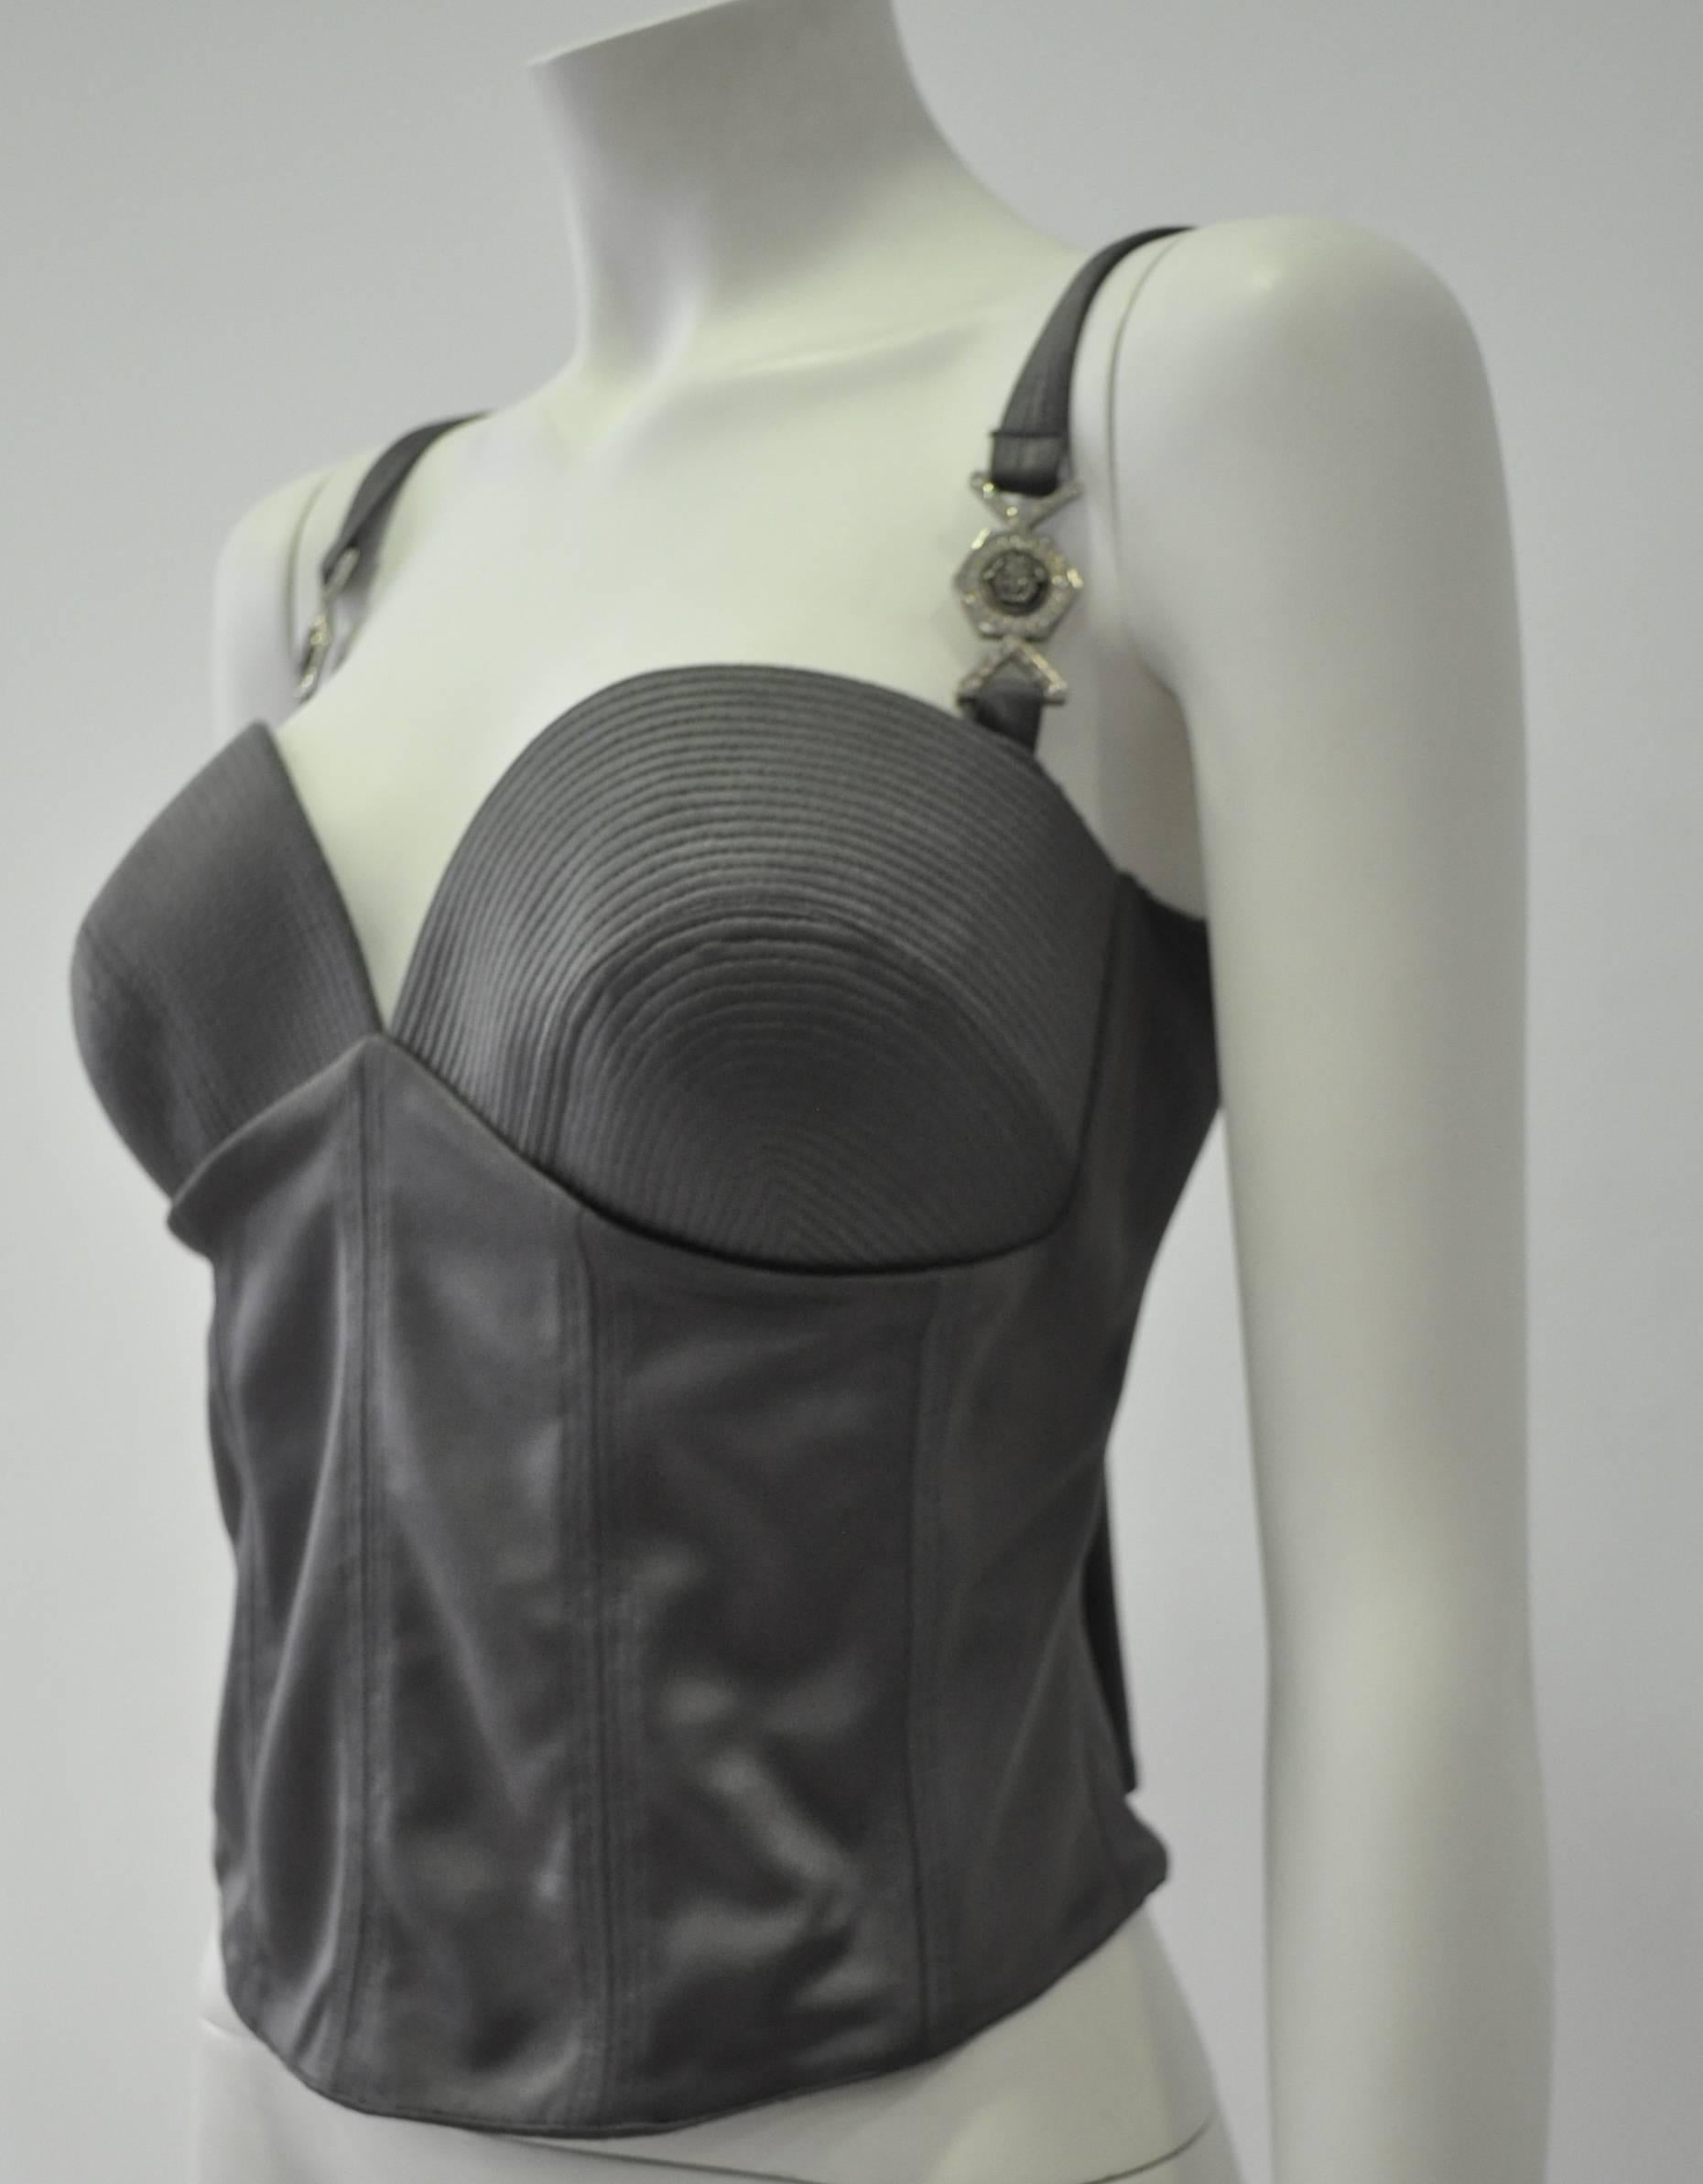 Women's Iconic Gianni Versace Versatile Couture Anthracite Boned Bustier